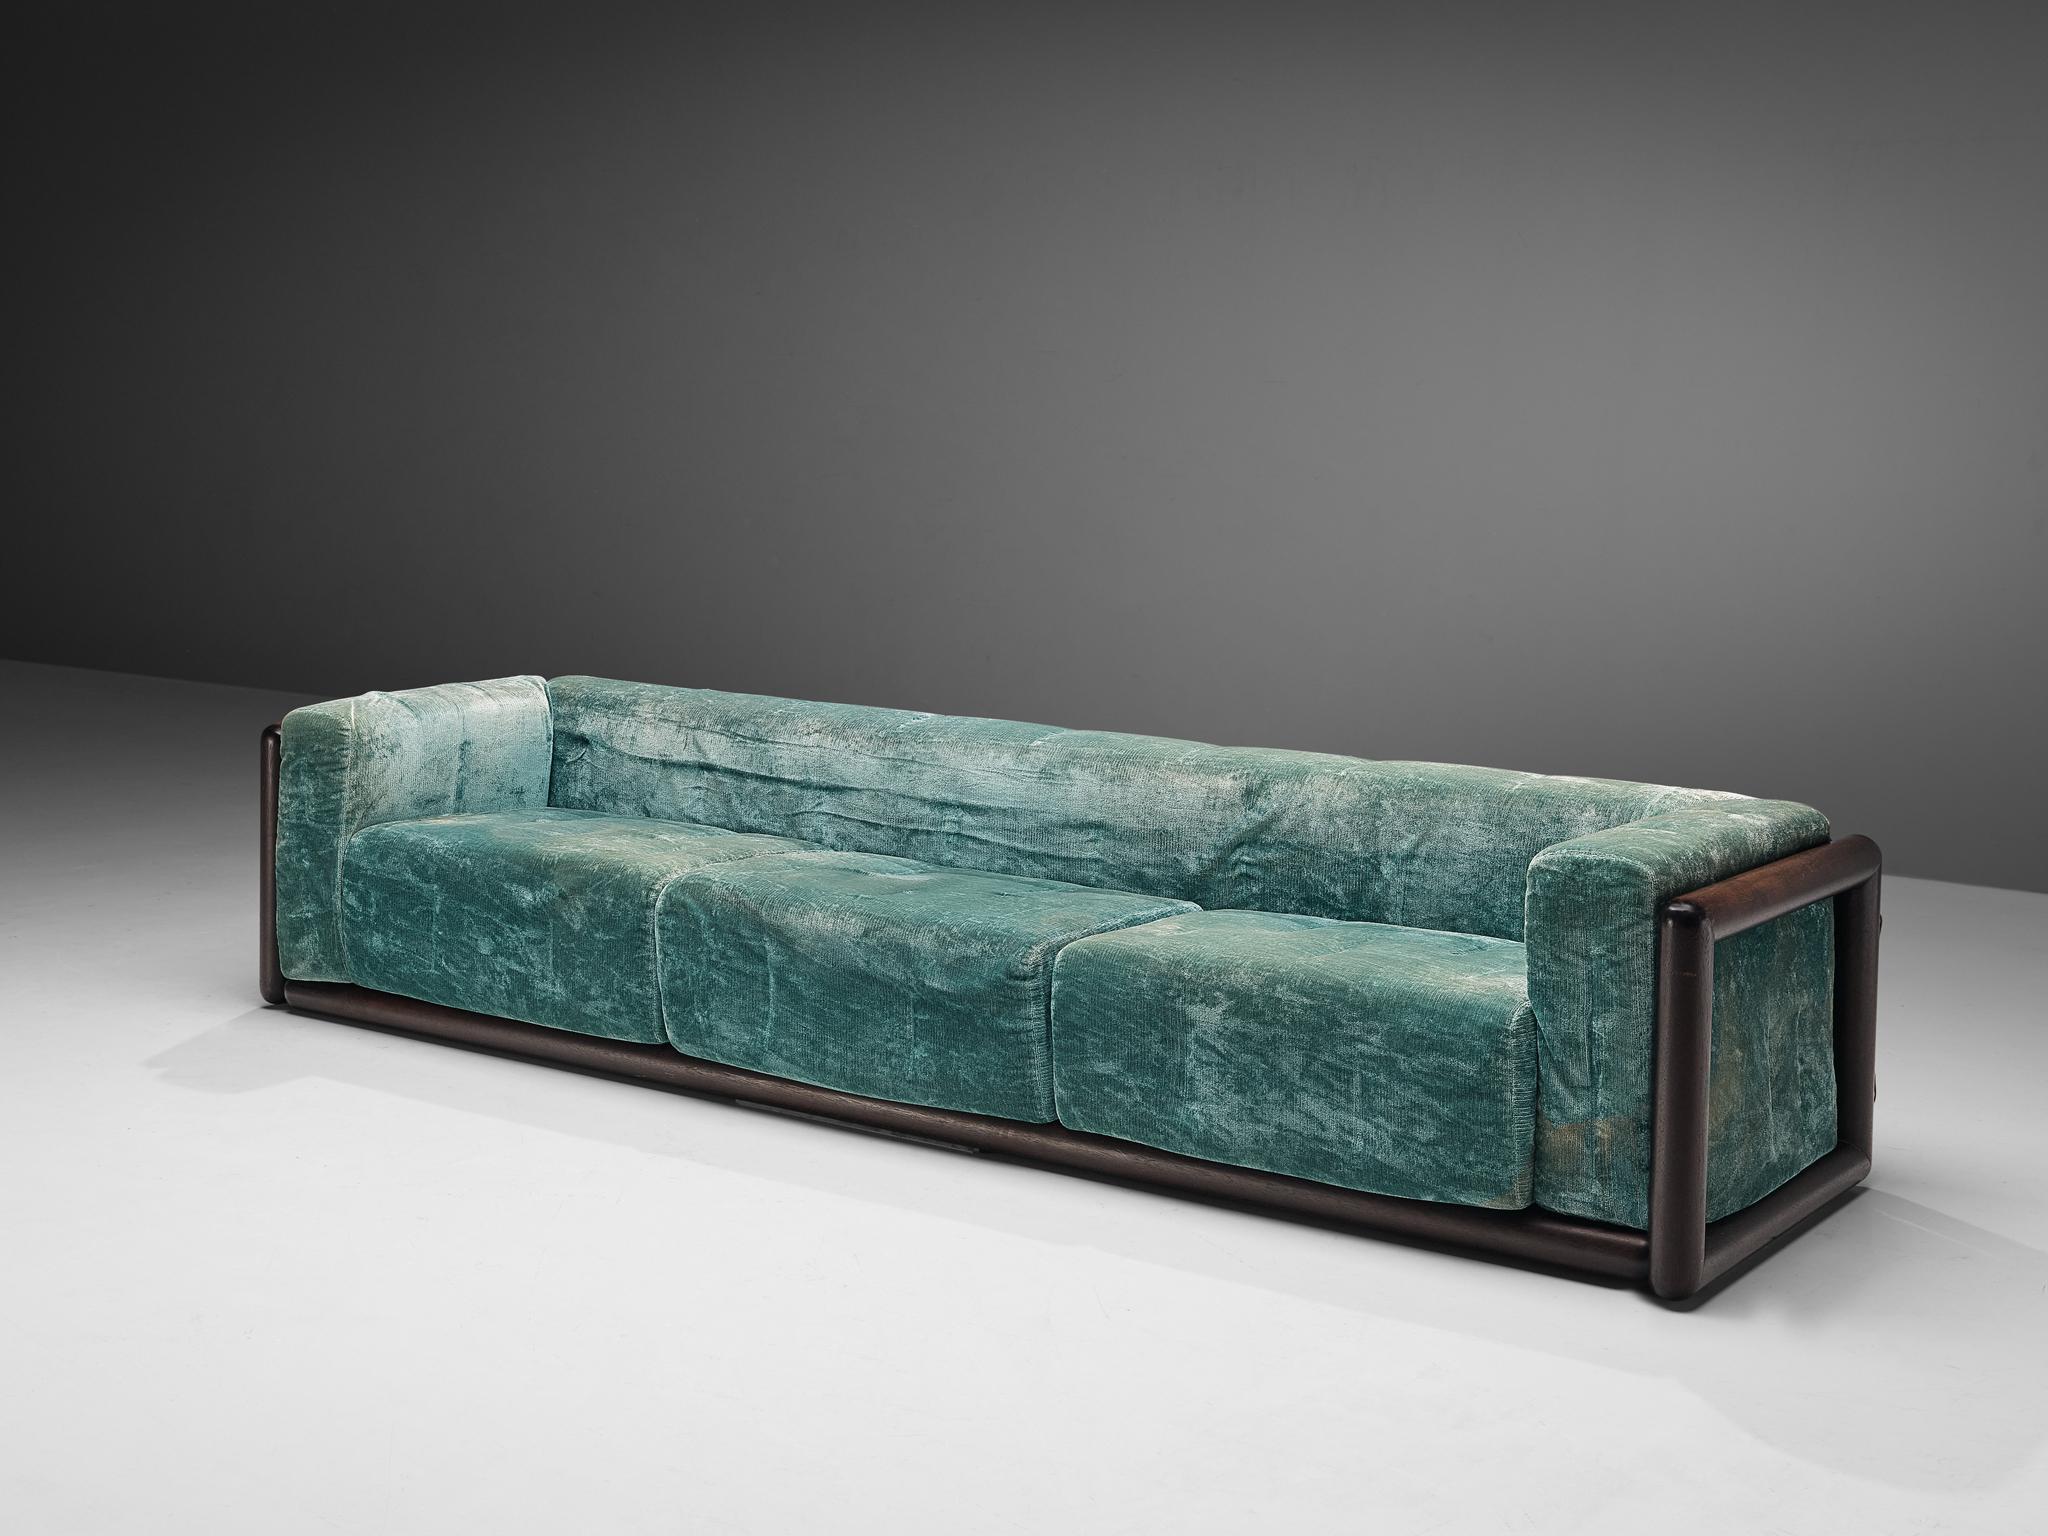 Carlo Scarpa for Simon Collezione, 'Cornaro' sofa, jade velvet fabric, stained mahogany, Italy, 1973

The 'Cornaro' sofa by Carlo Scarpa is a perfect example of the Ultrarazionale style; breaking away from the strict limits of Rationalism, resulting